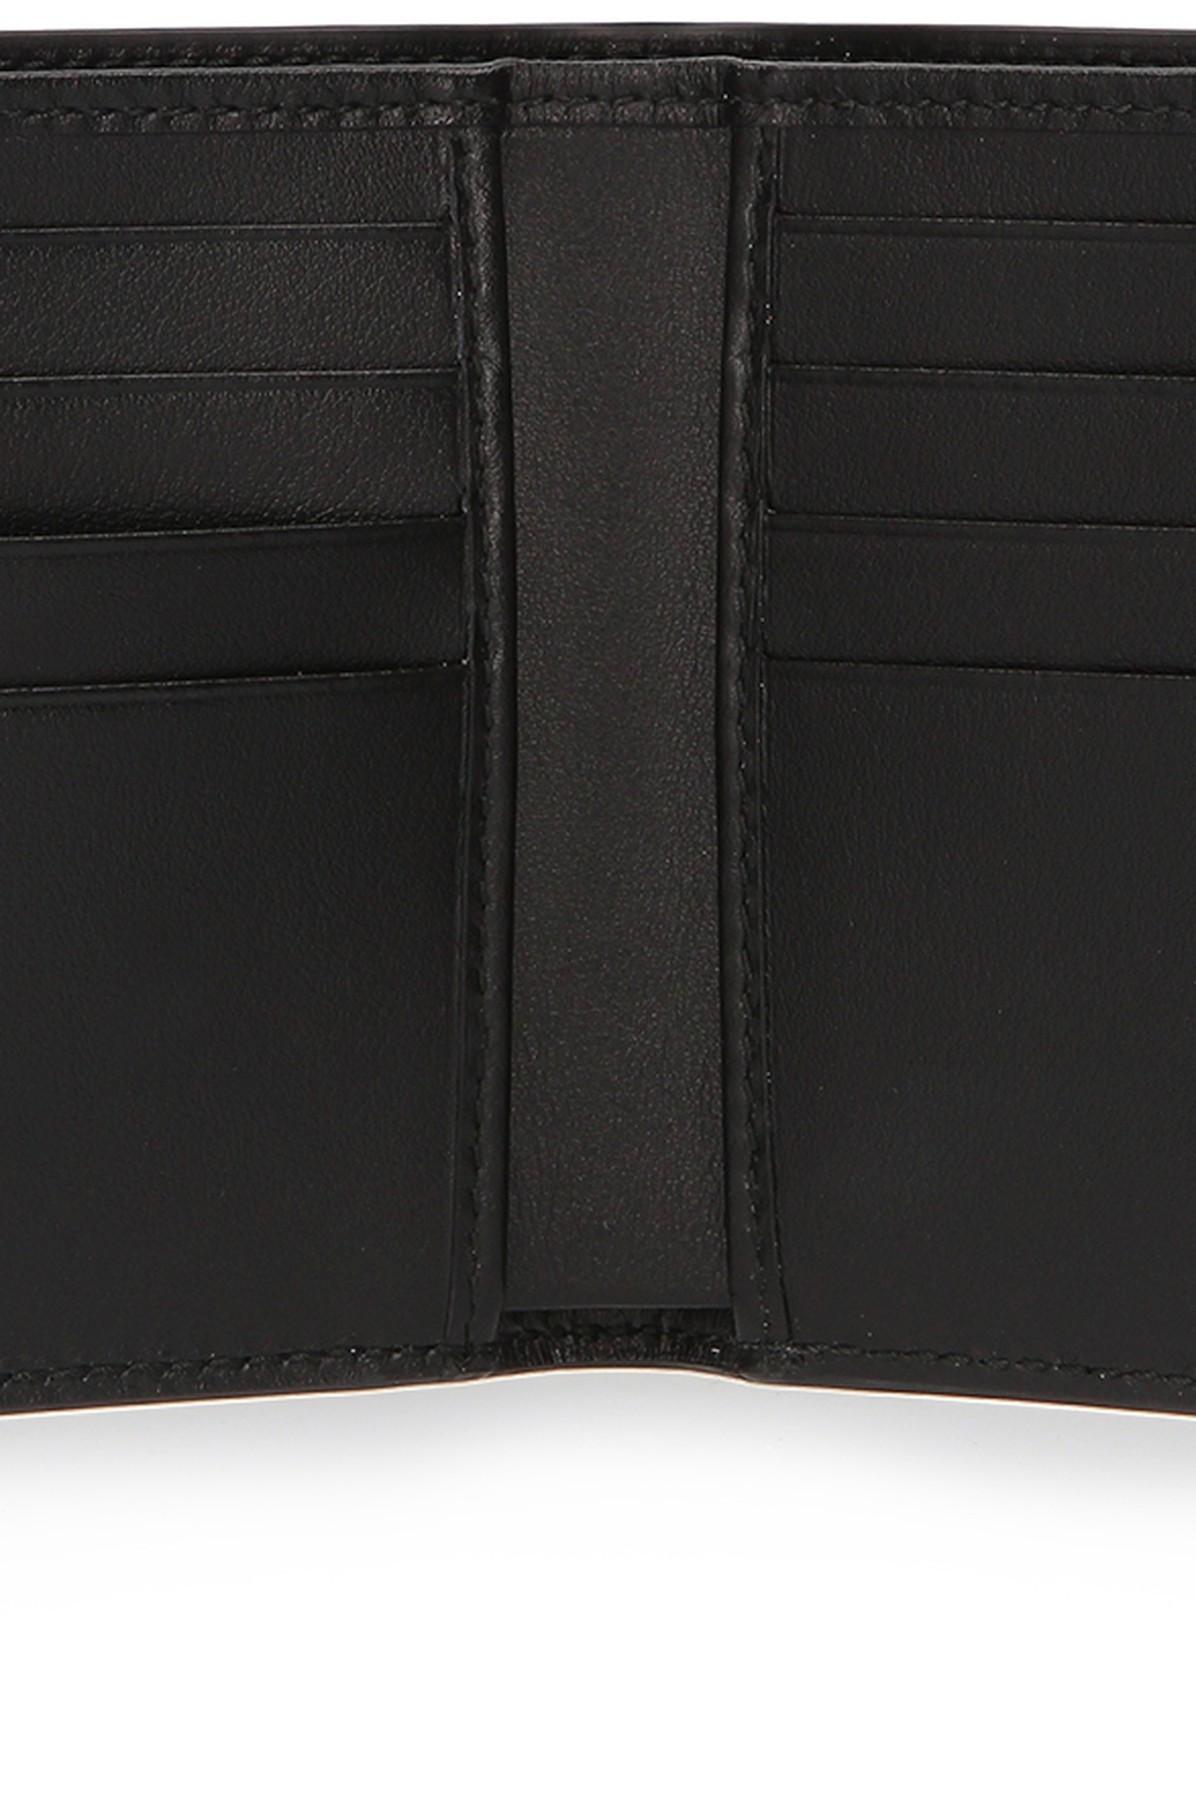 GUCCI Card Holder Canvas Leather Bifold Black Wallet Made in Italy  Authentic Guc